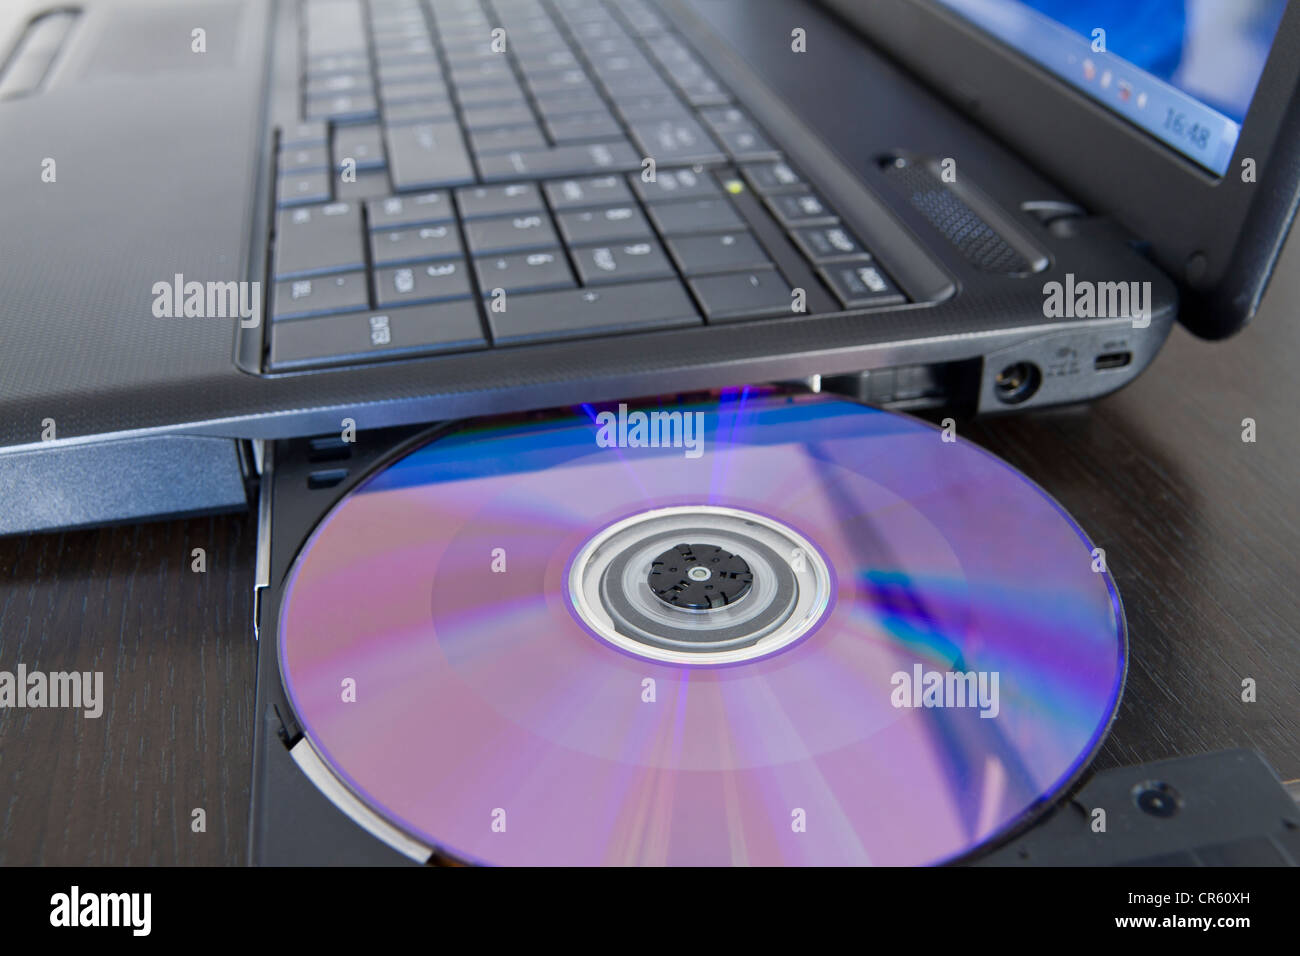 Loading software into a laptop Stock Photo